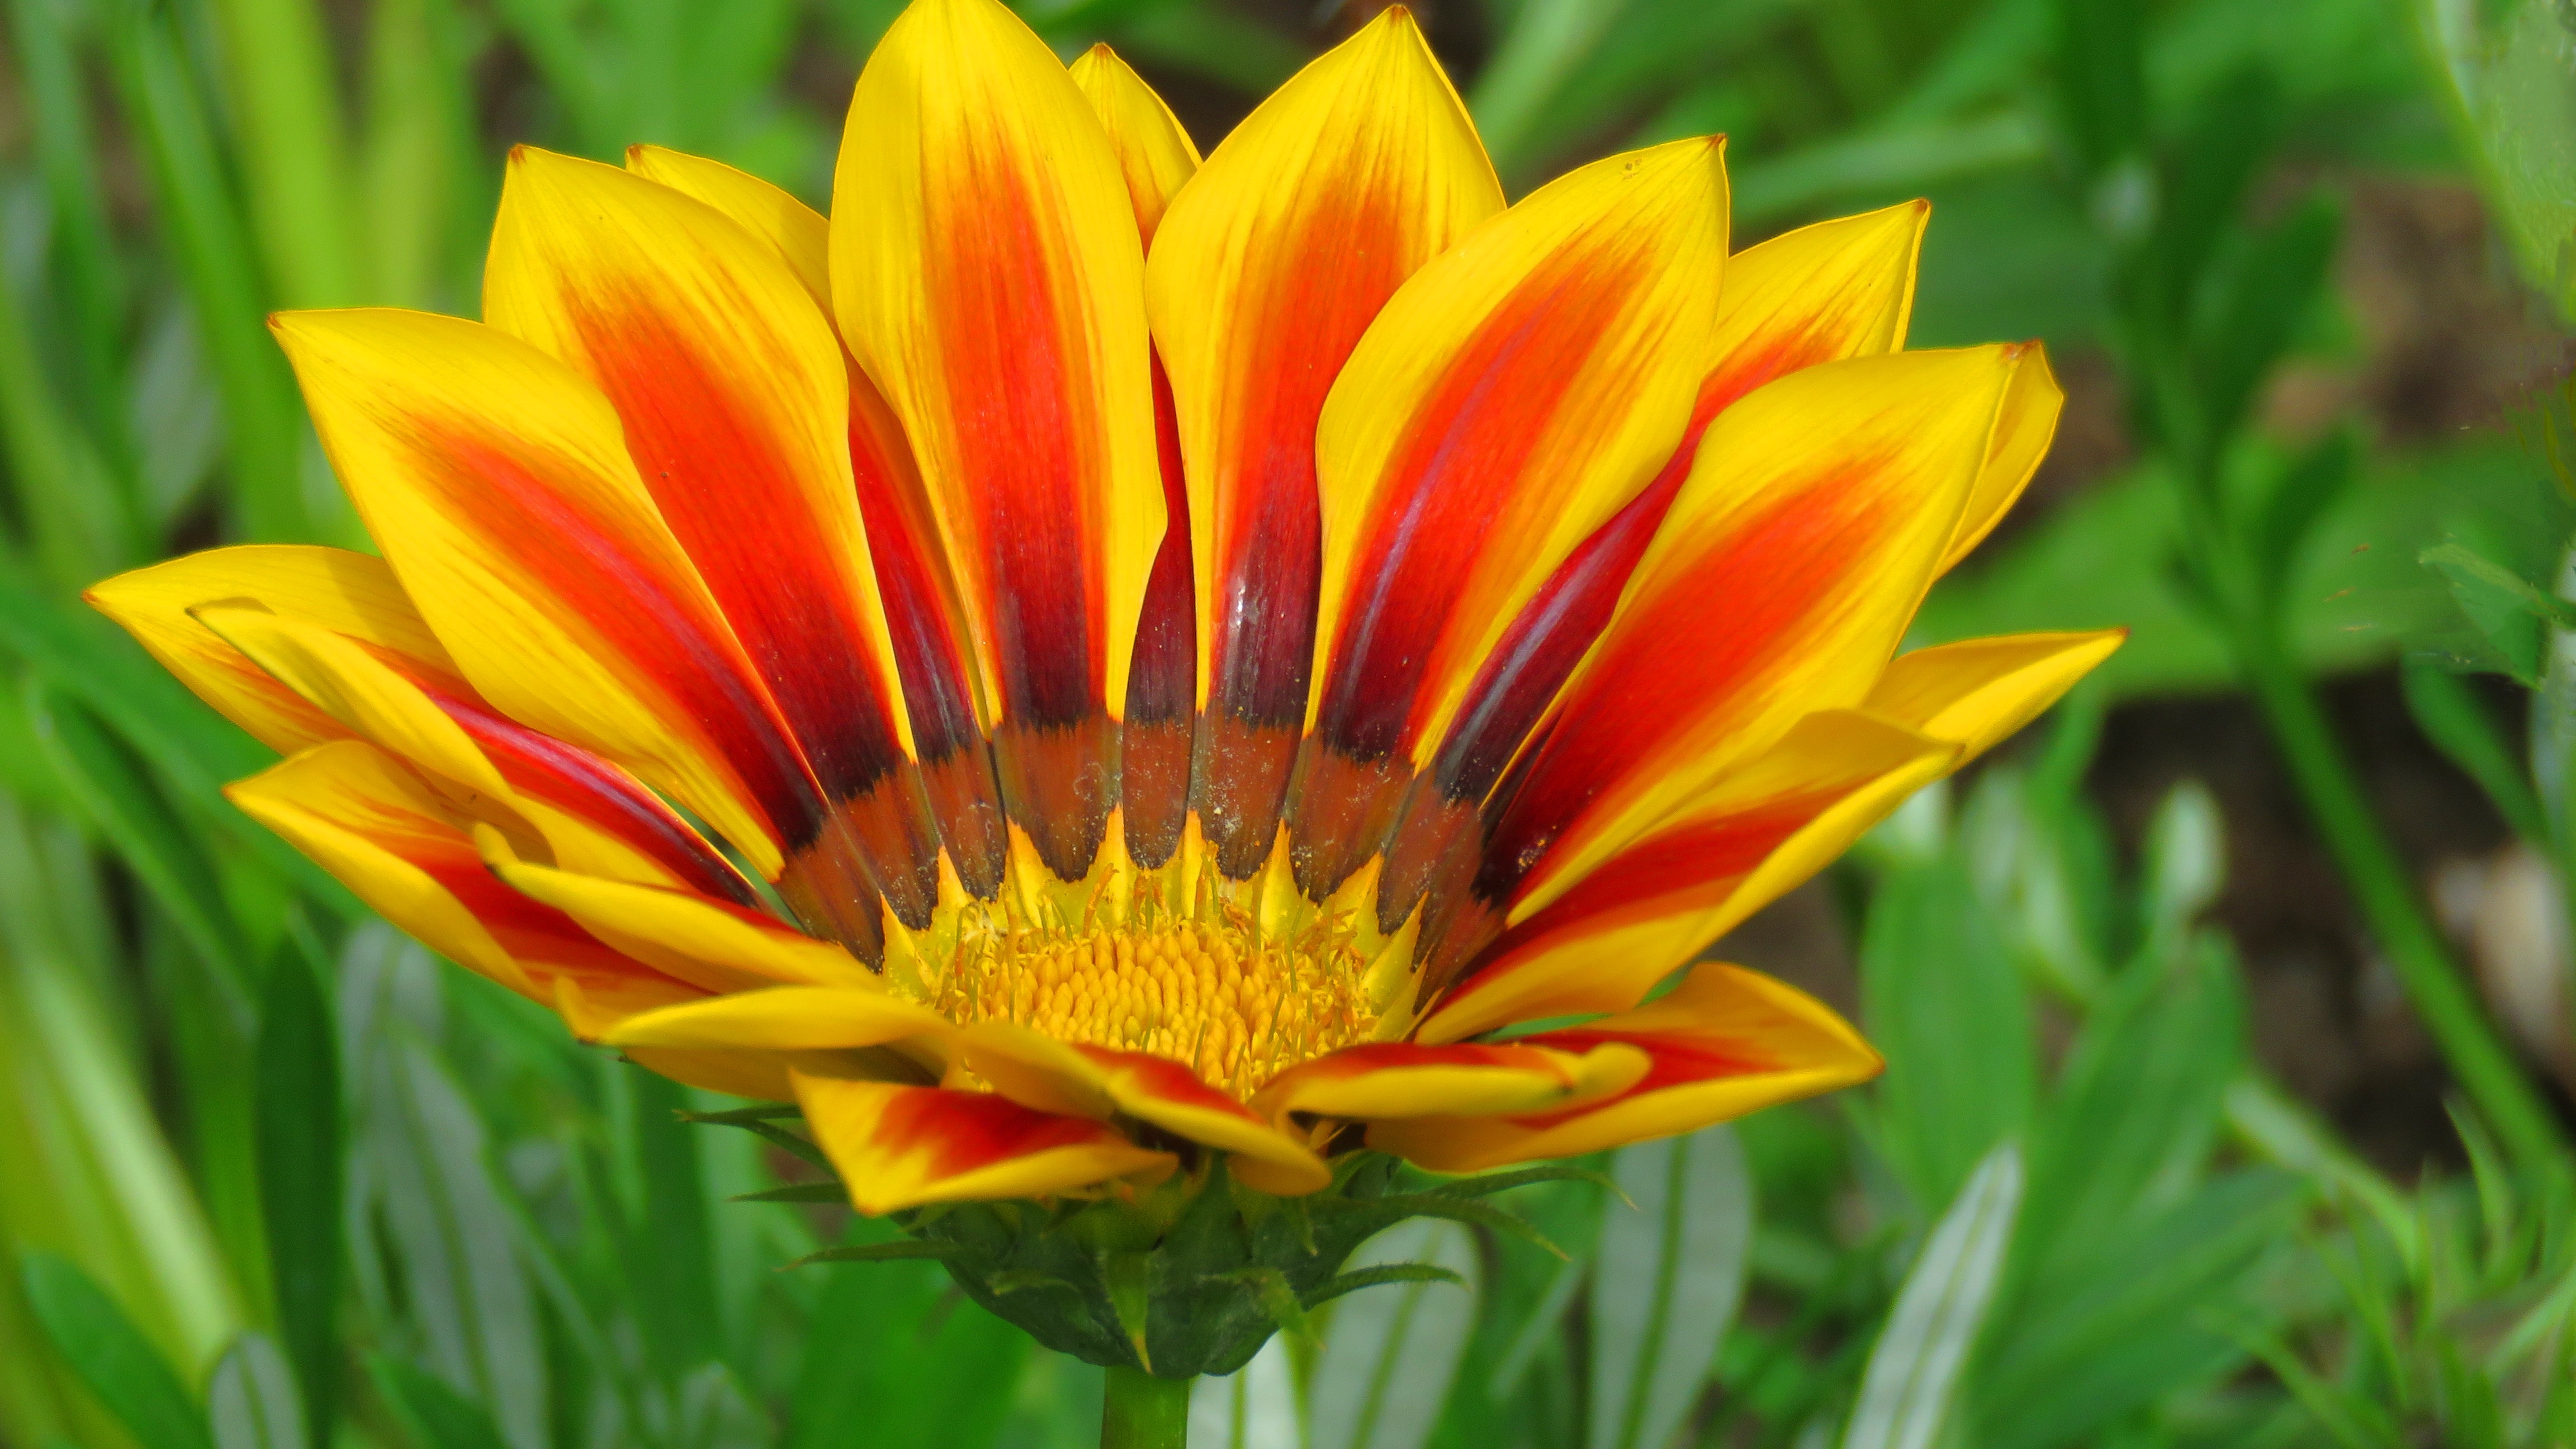 yellow and red multi-petaled flower